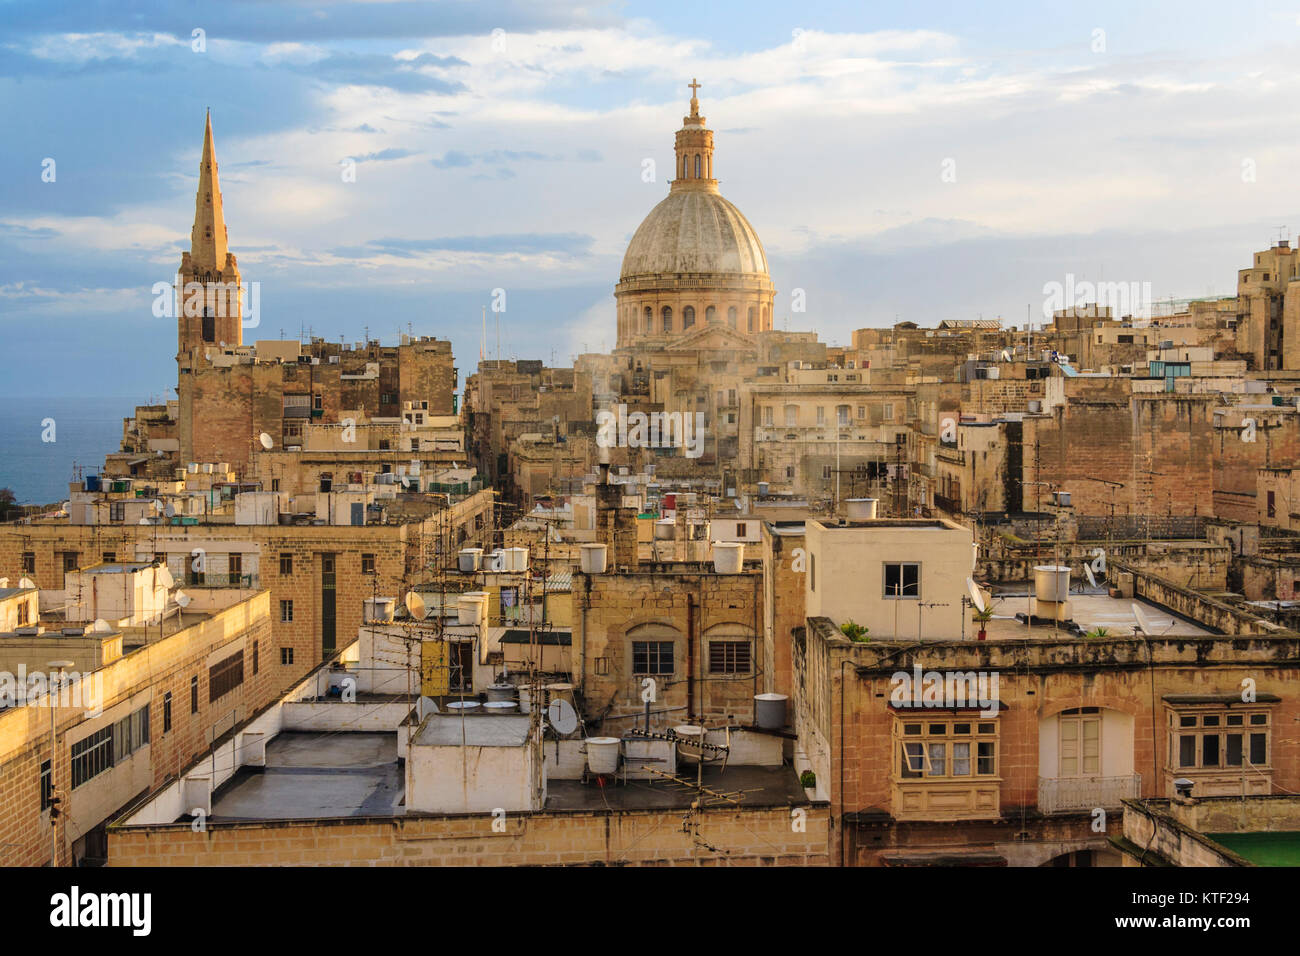 Overview at dawn of historic city of Valletta, Malta Stock Photo